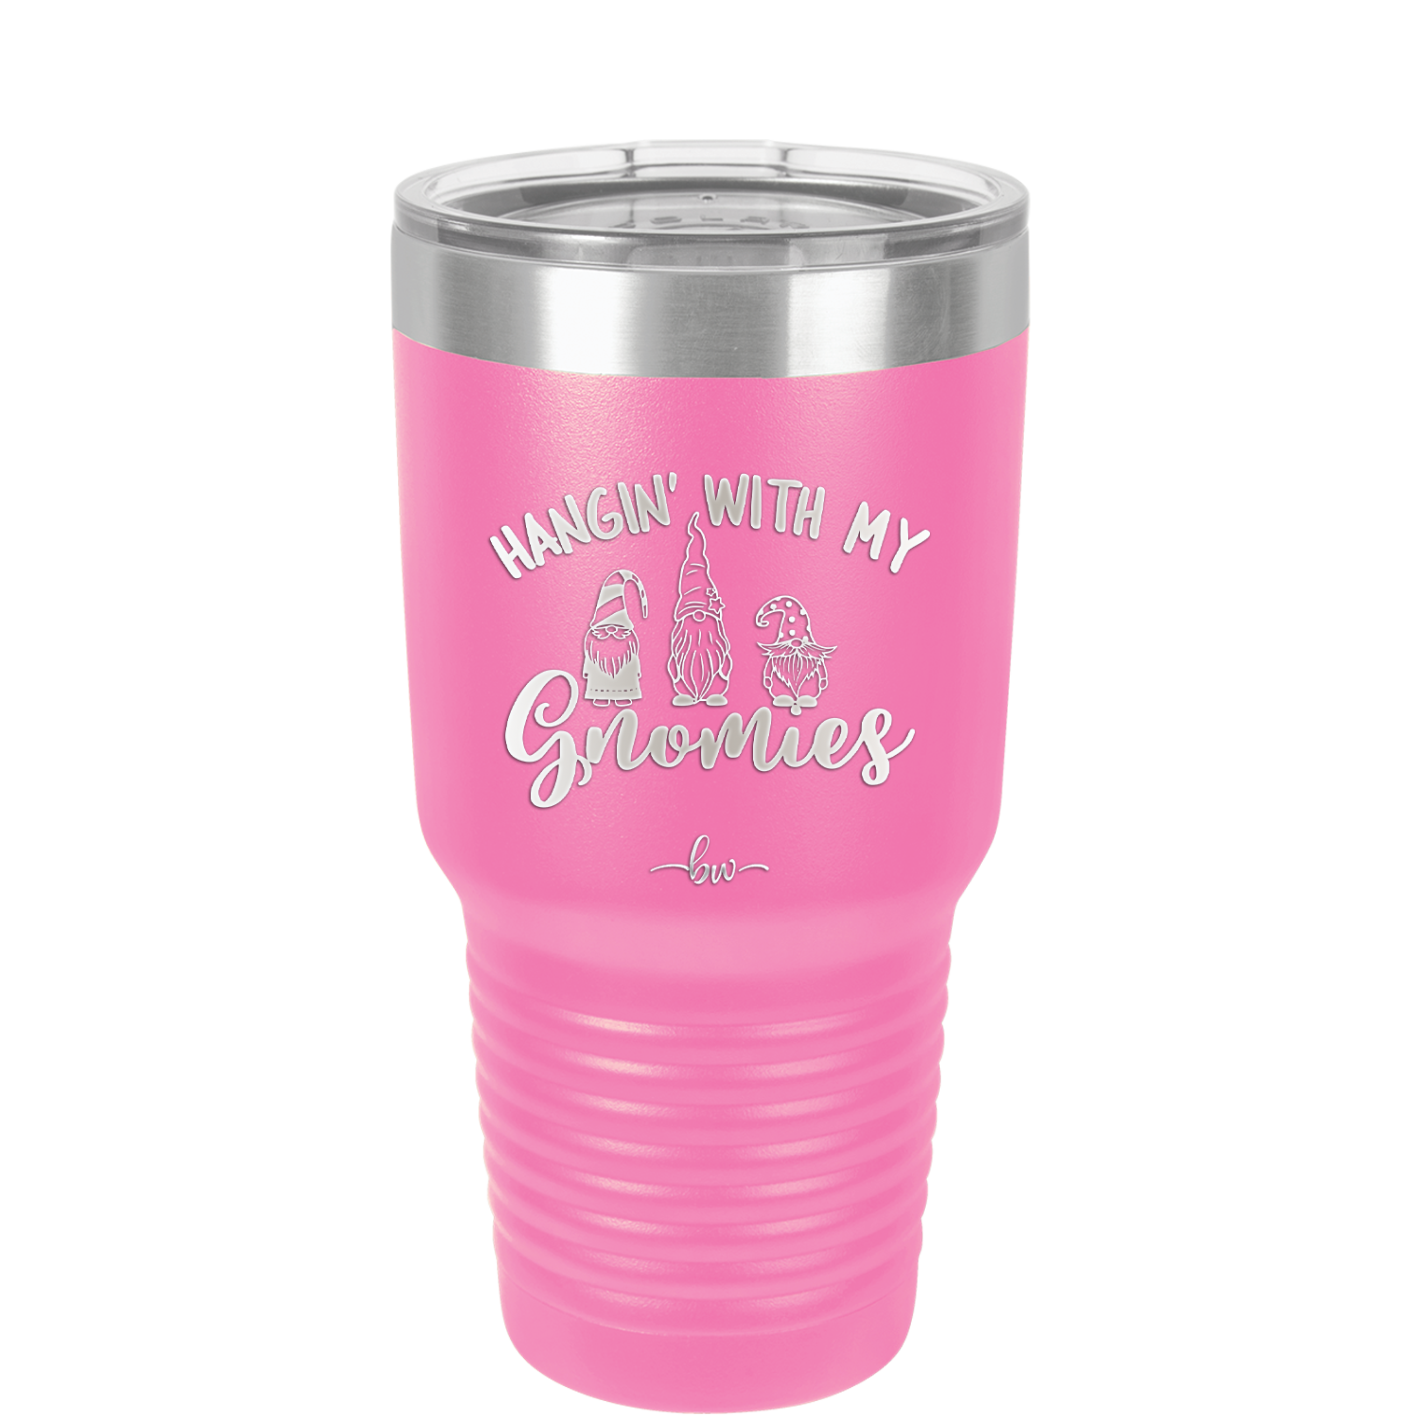 Hangin with My Gnomies 1 - Laser Engraved Stainless Steel Drinkware - 2525 -